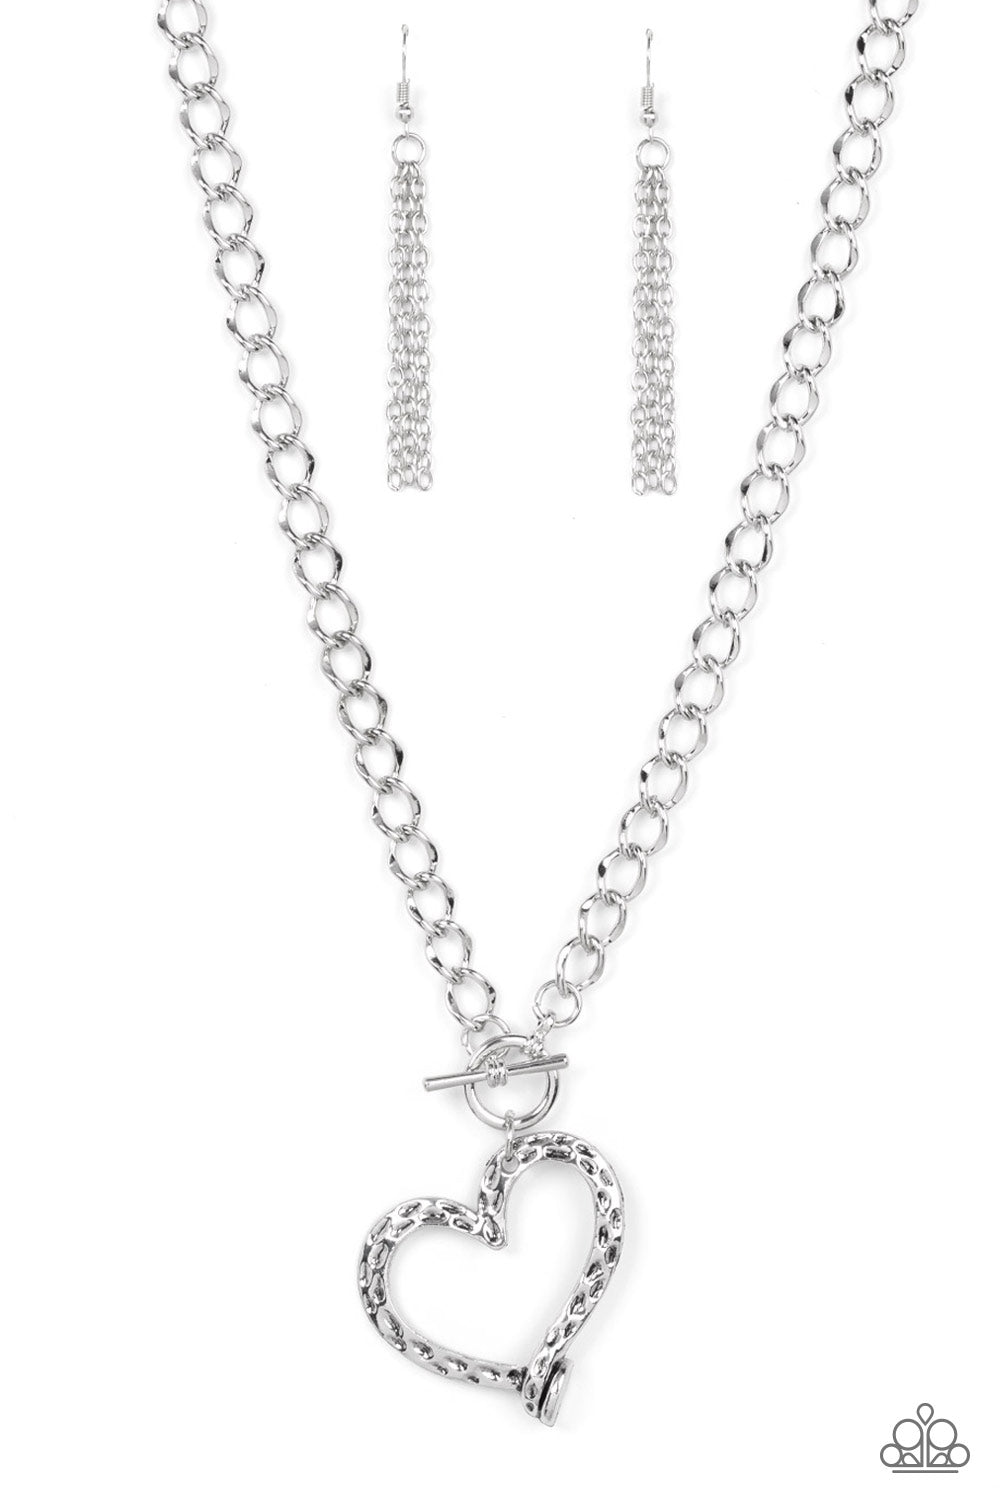 Reimagined Romance - Silver necklace 2153